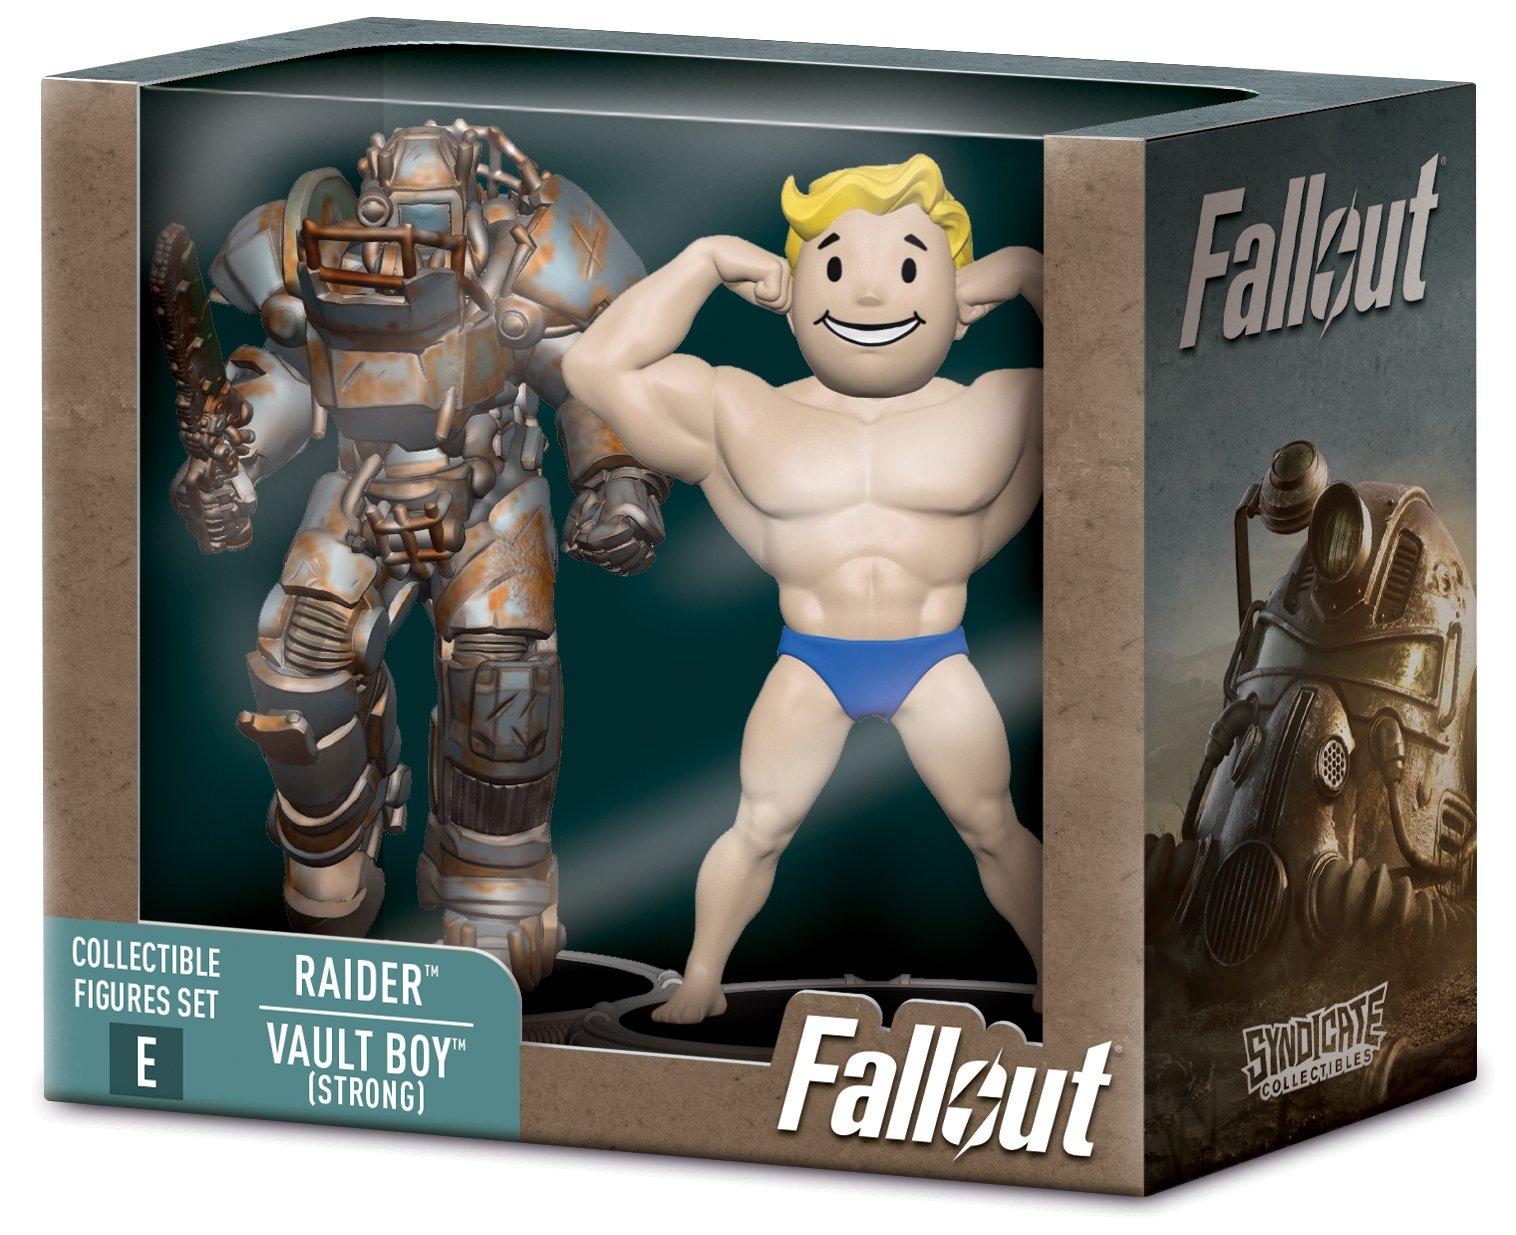 Fallout Raider and Vault Boy (Strong) (Build-A-Figure -Deathclaw) 3-in Action Figure Set